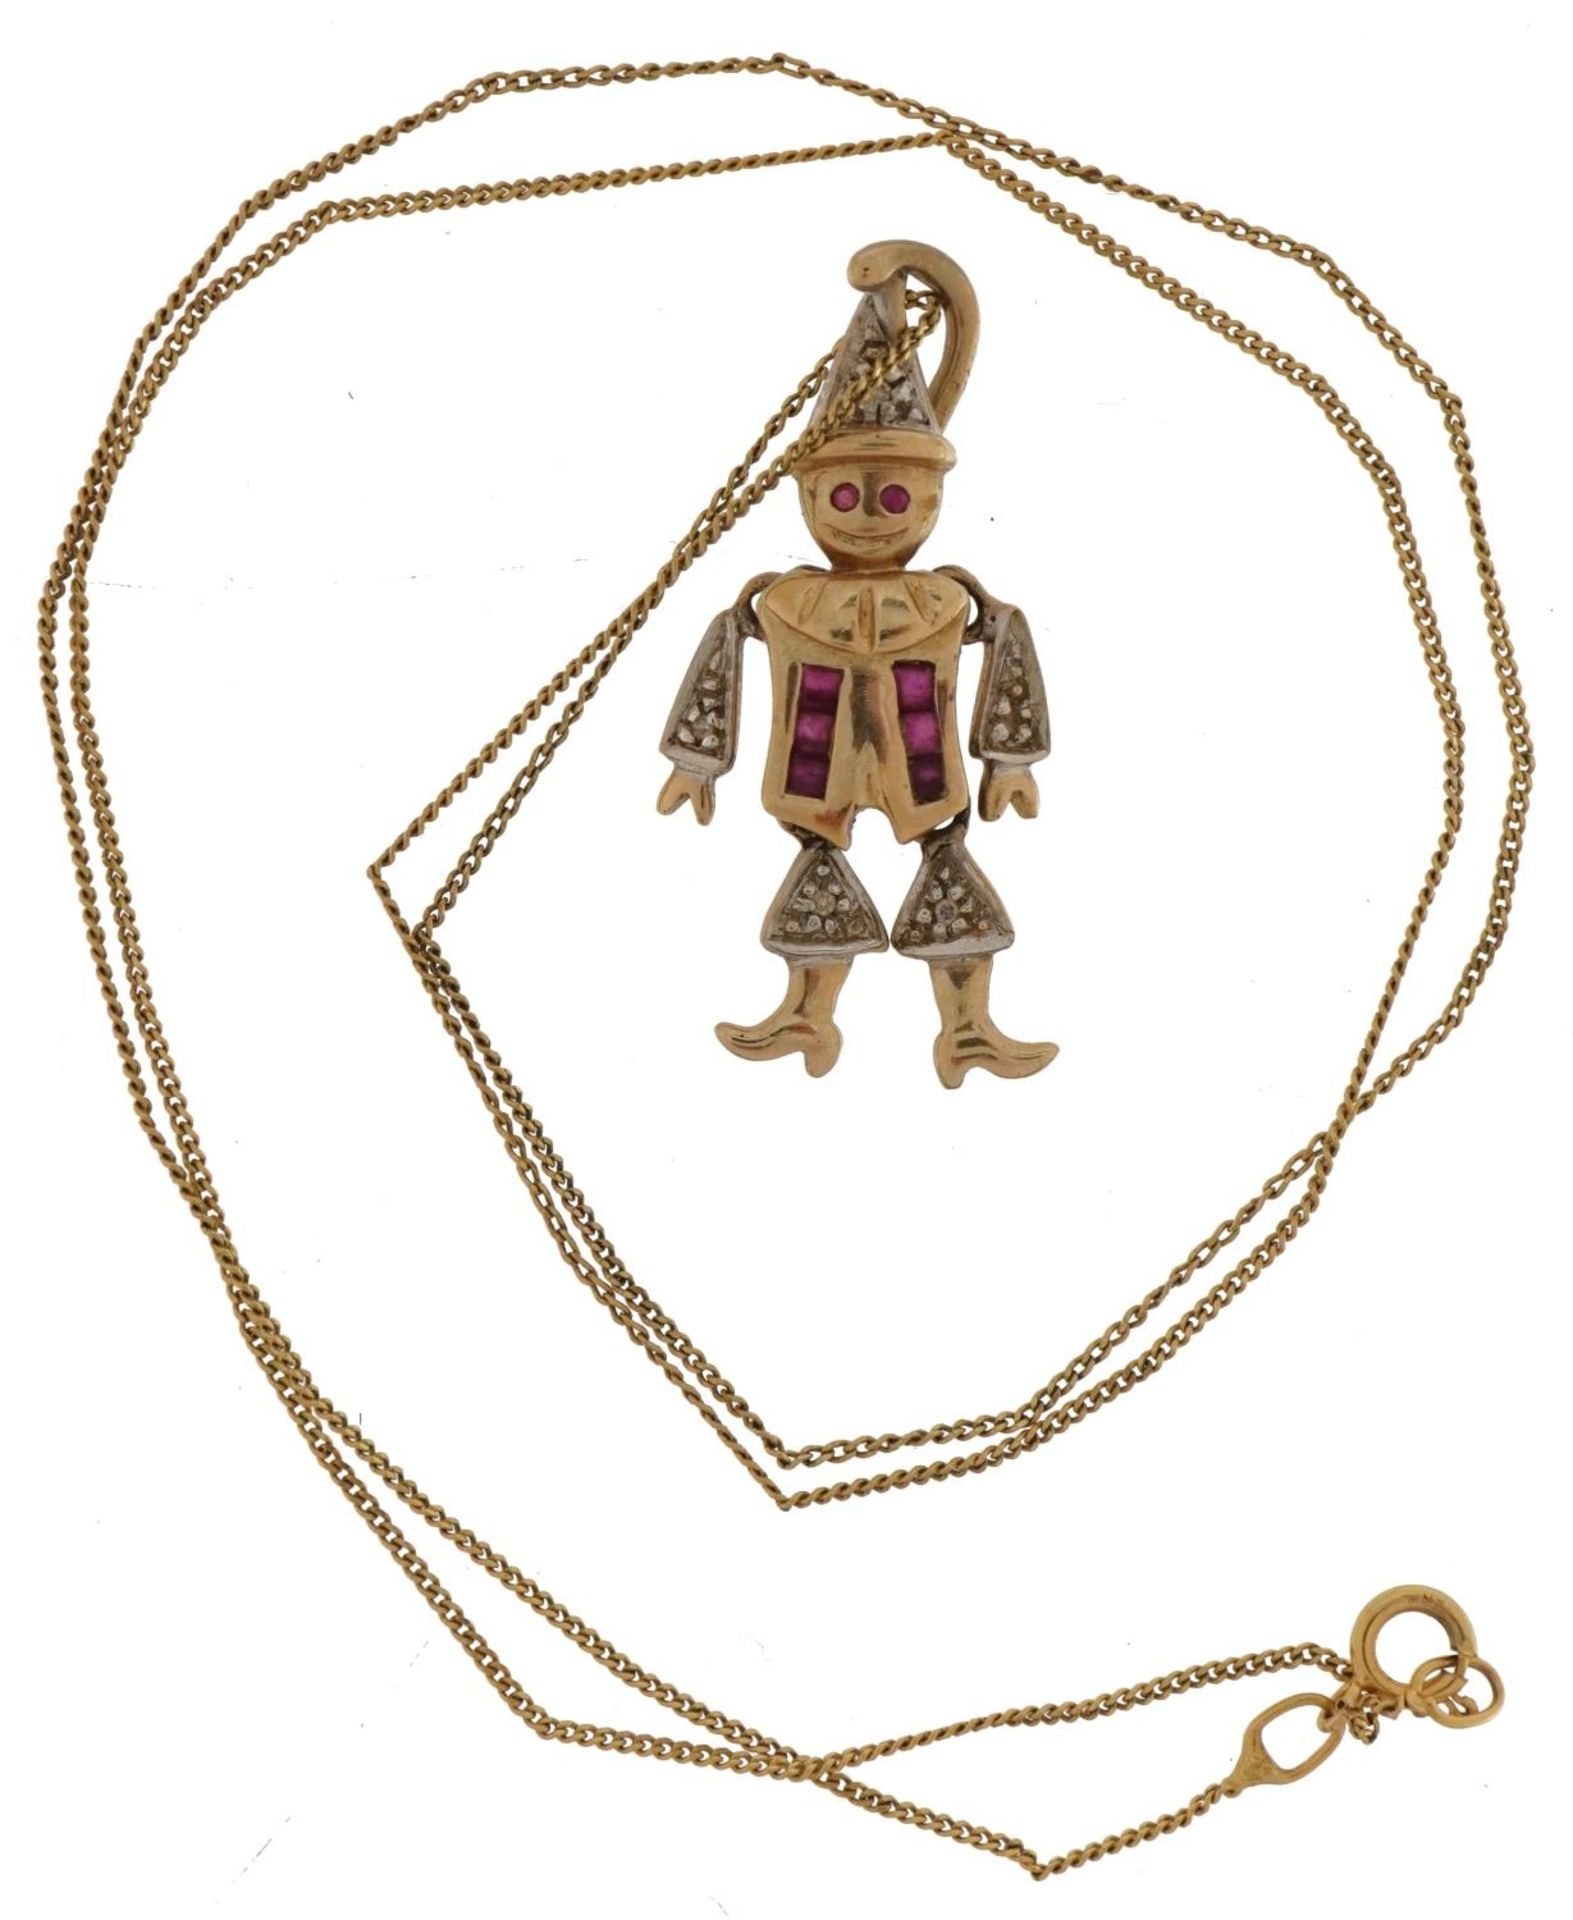 9ct gold ruby and diamond clown pendant with articulated limbs on a 9ct gold necklace, 2.5cm high - Image 2 of 4